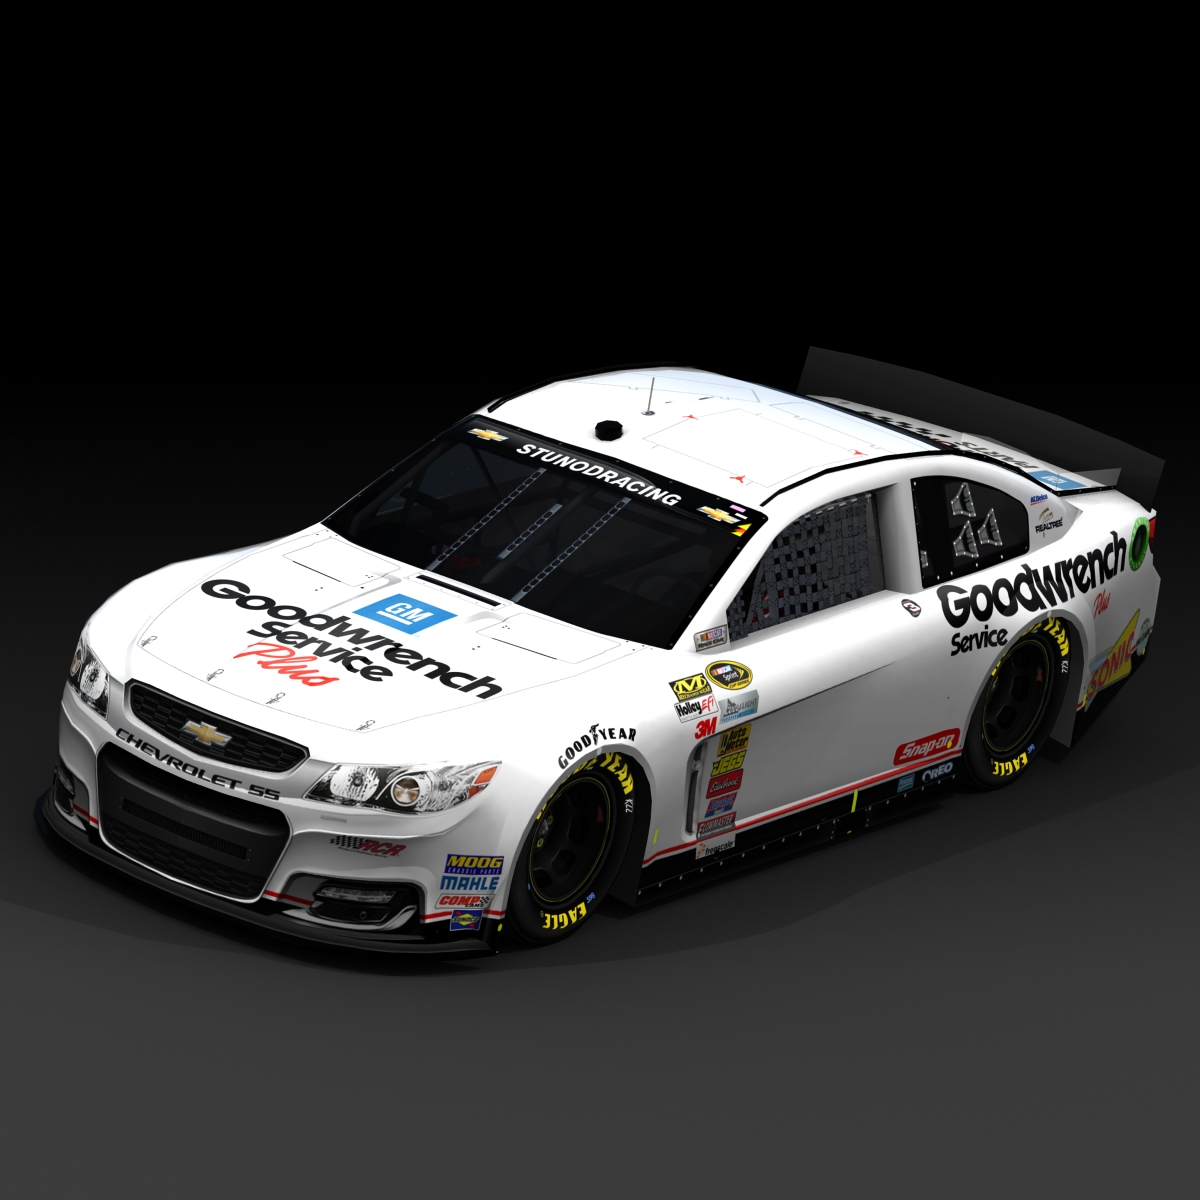 Kevin_Harvick-GoodWrench_Service-Plus-Rookie2001-render.jpg